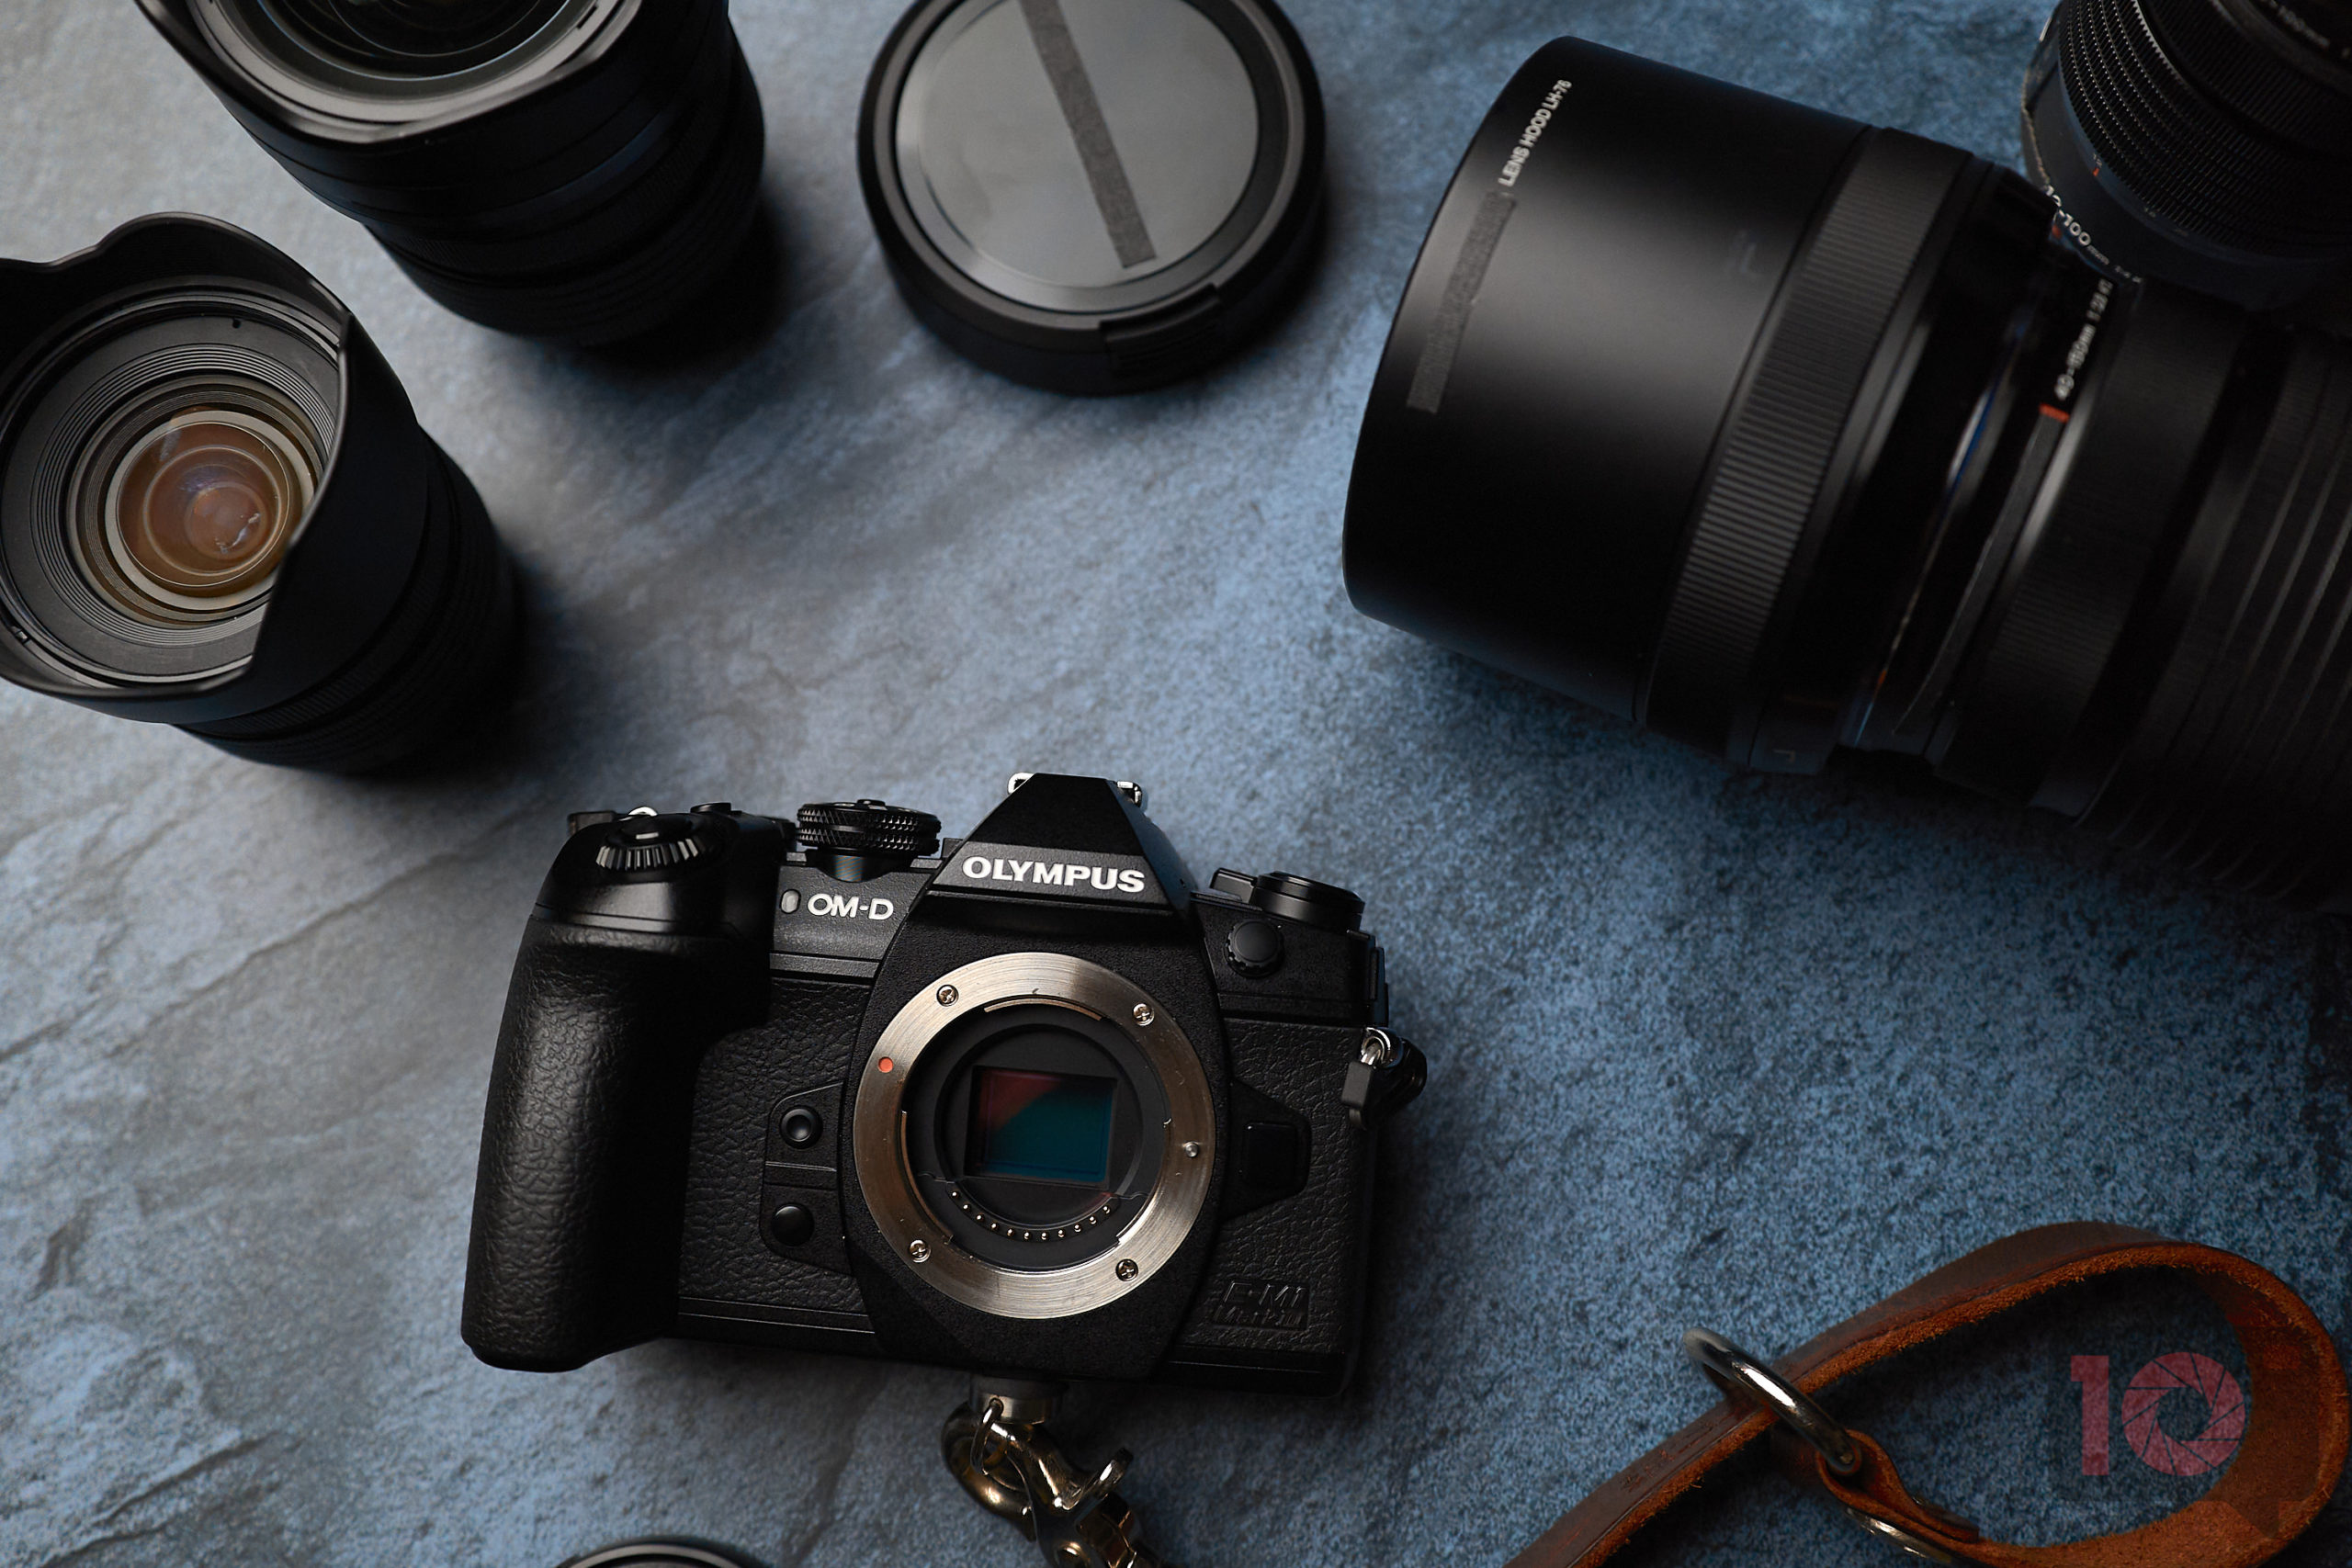 Productiviteit diep Stationair Review: Olympus OMD EM1 III (A Travel Photographer's Imperfect Gem)